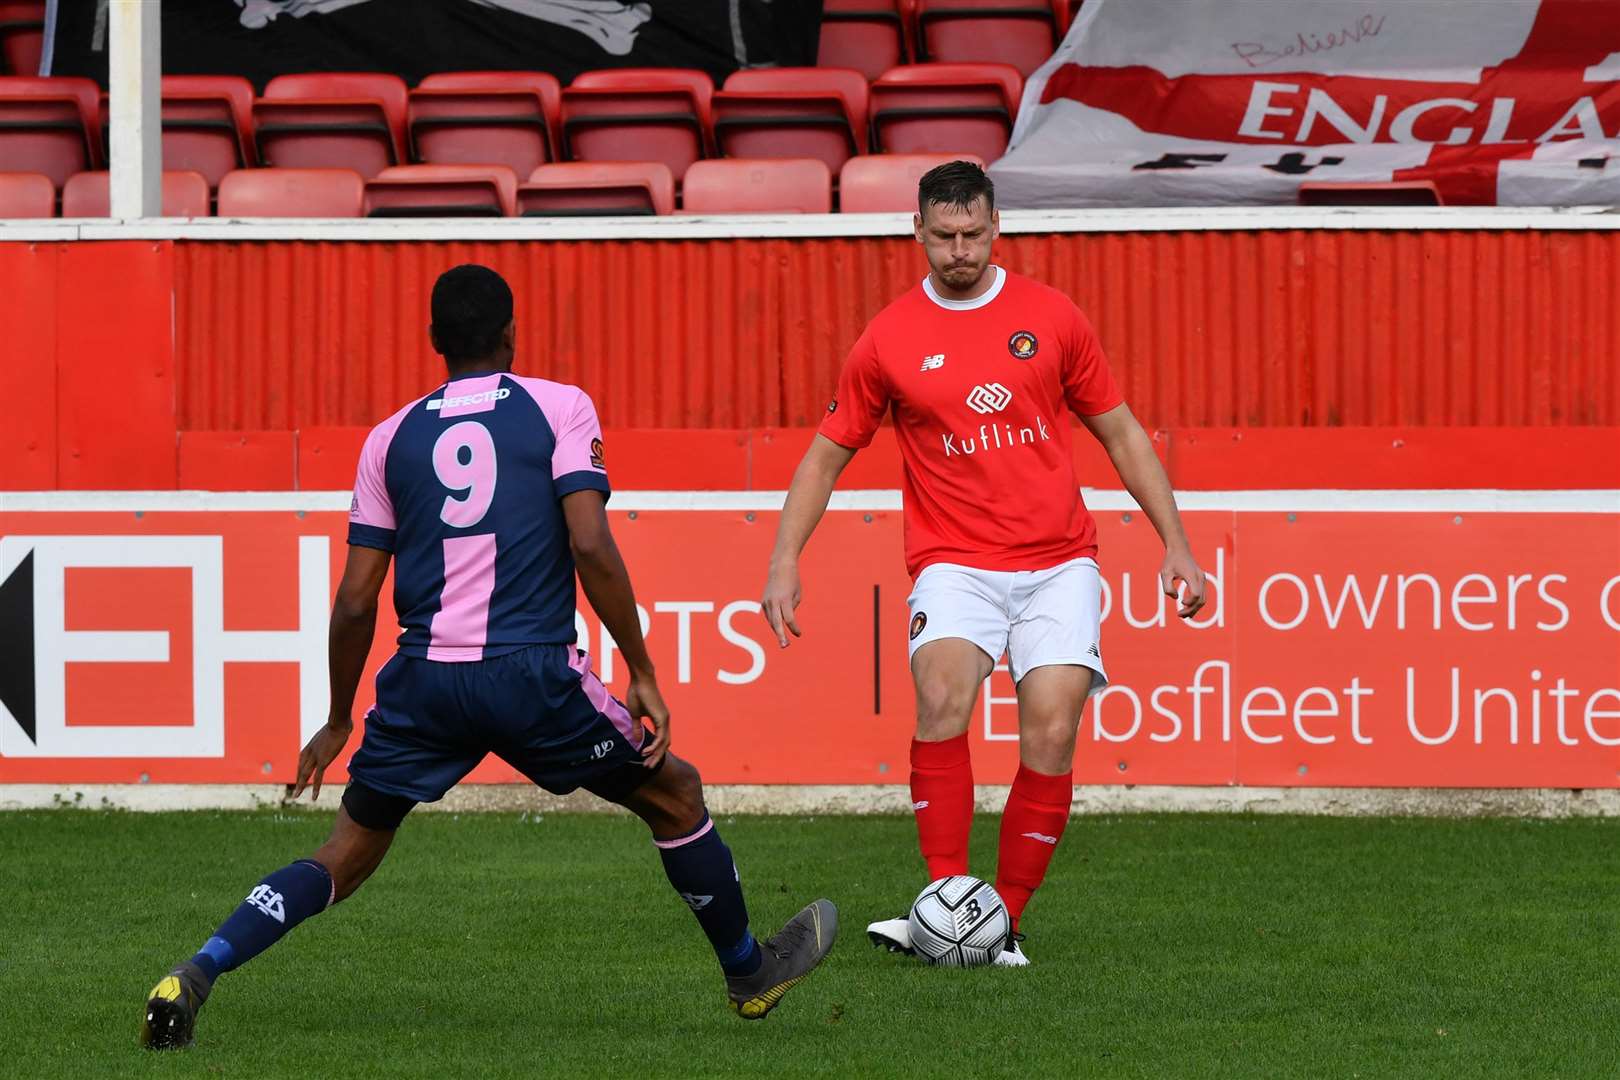 Jake Goodman is on the list of those released by Ebbsfleet United Picture: Keith Gillard